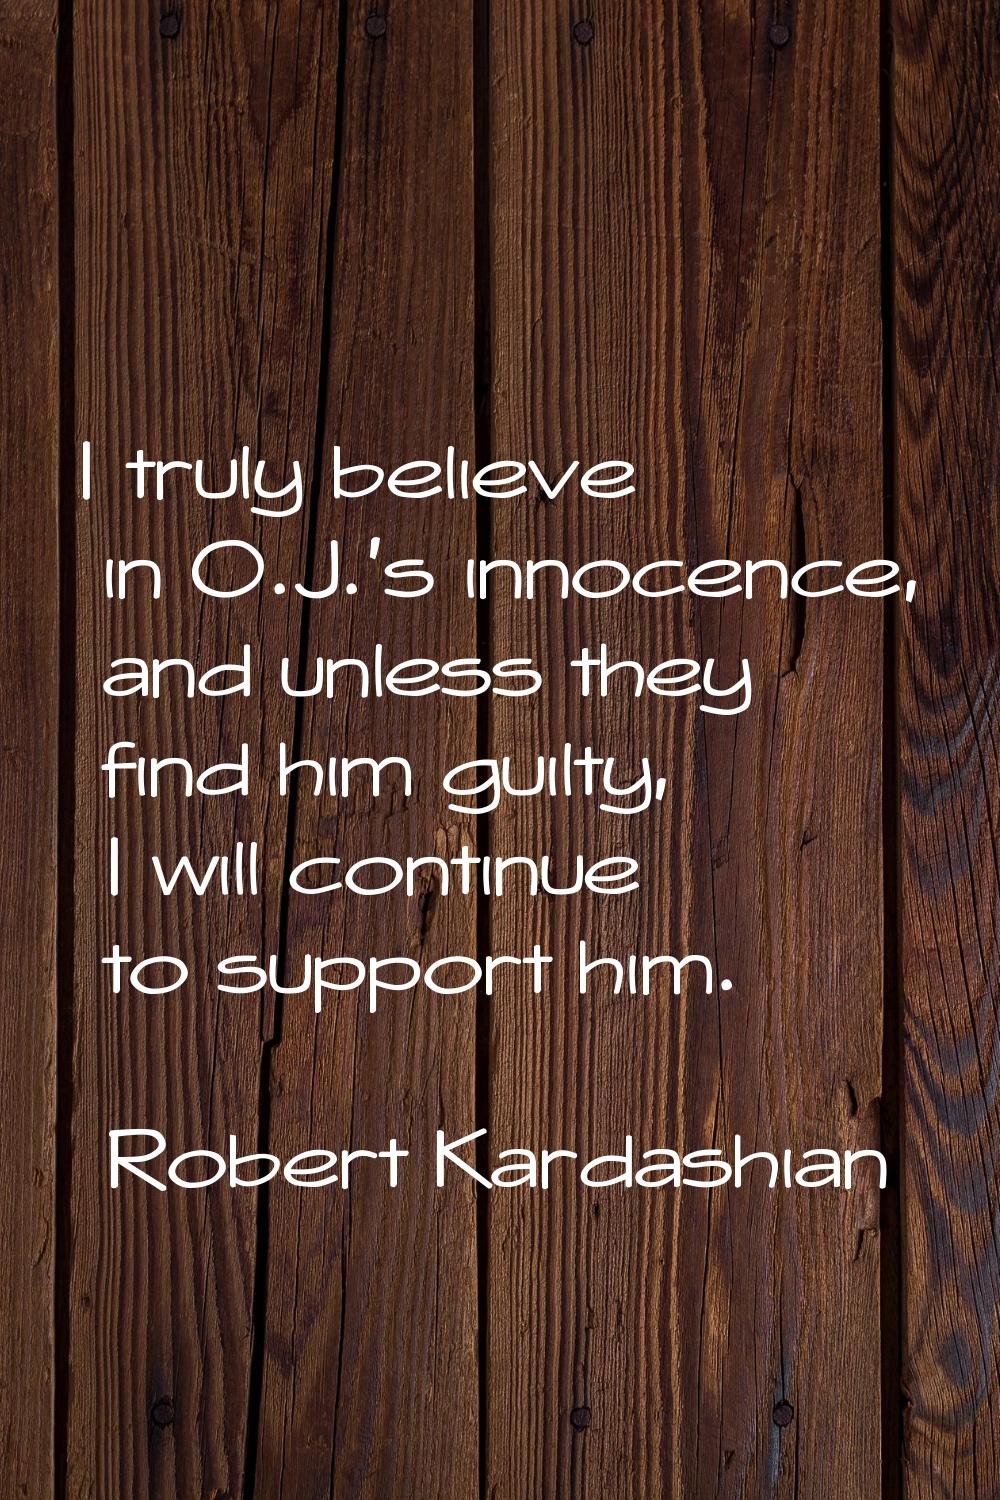 I truly believe in O.J.'s innocence, and unless they find him guilty, I will continue to support hi